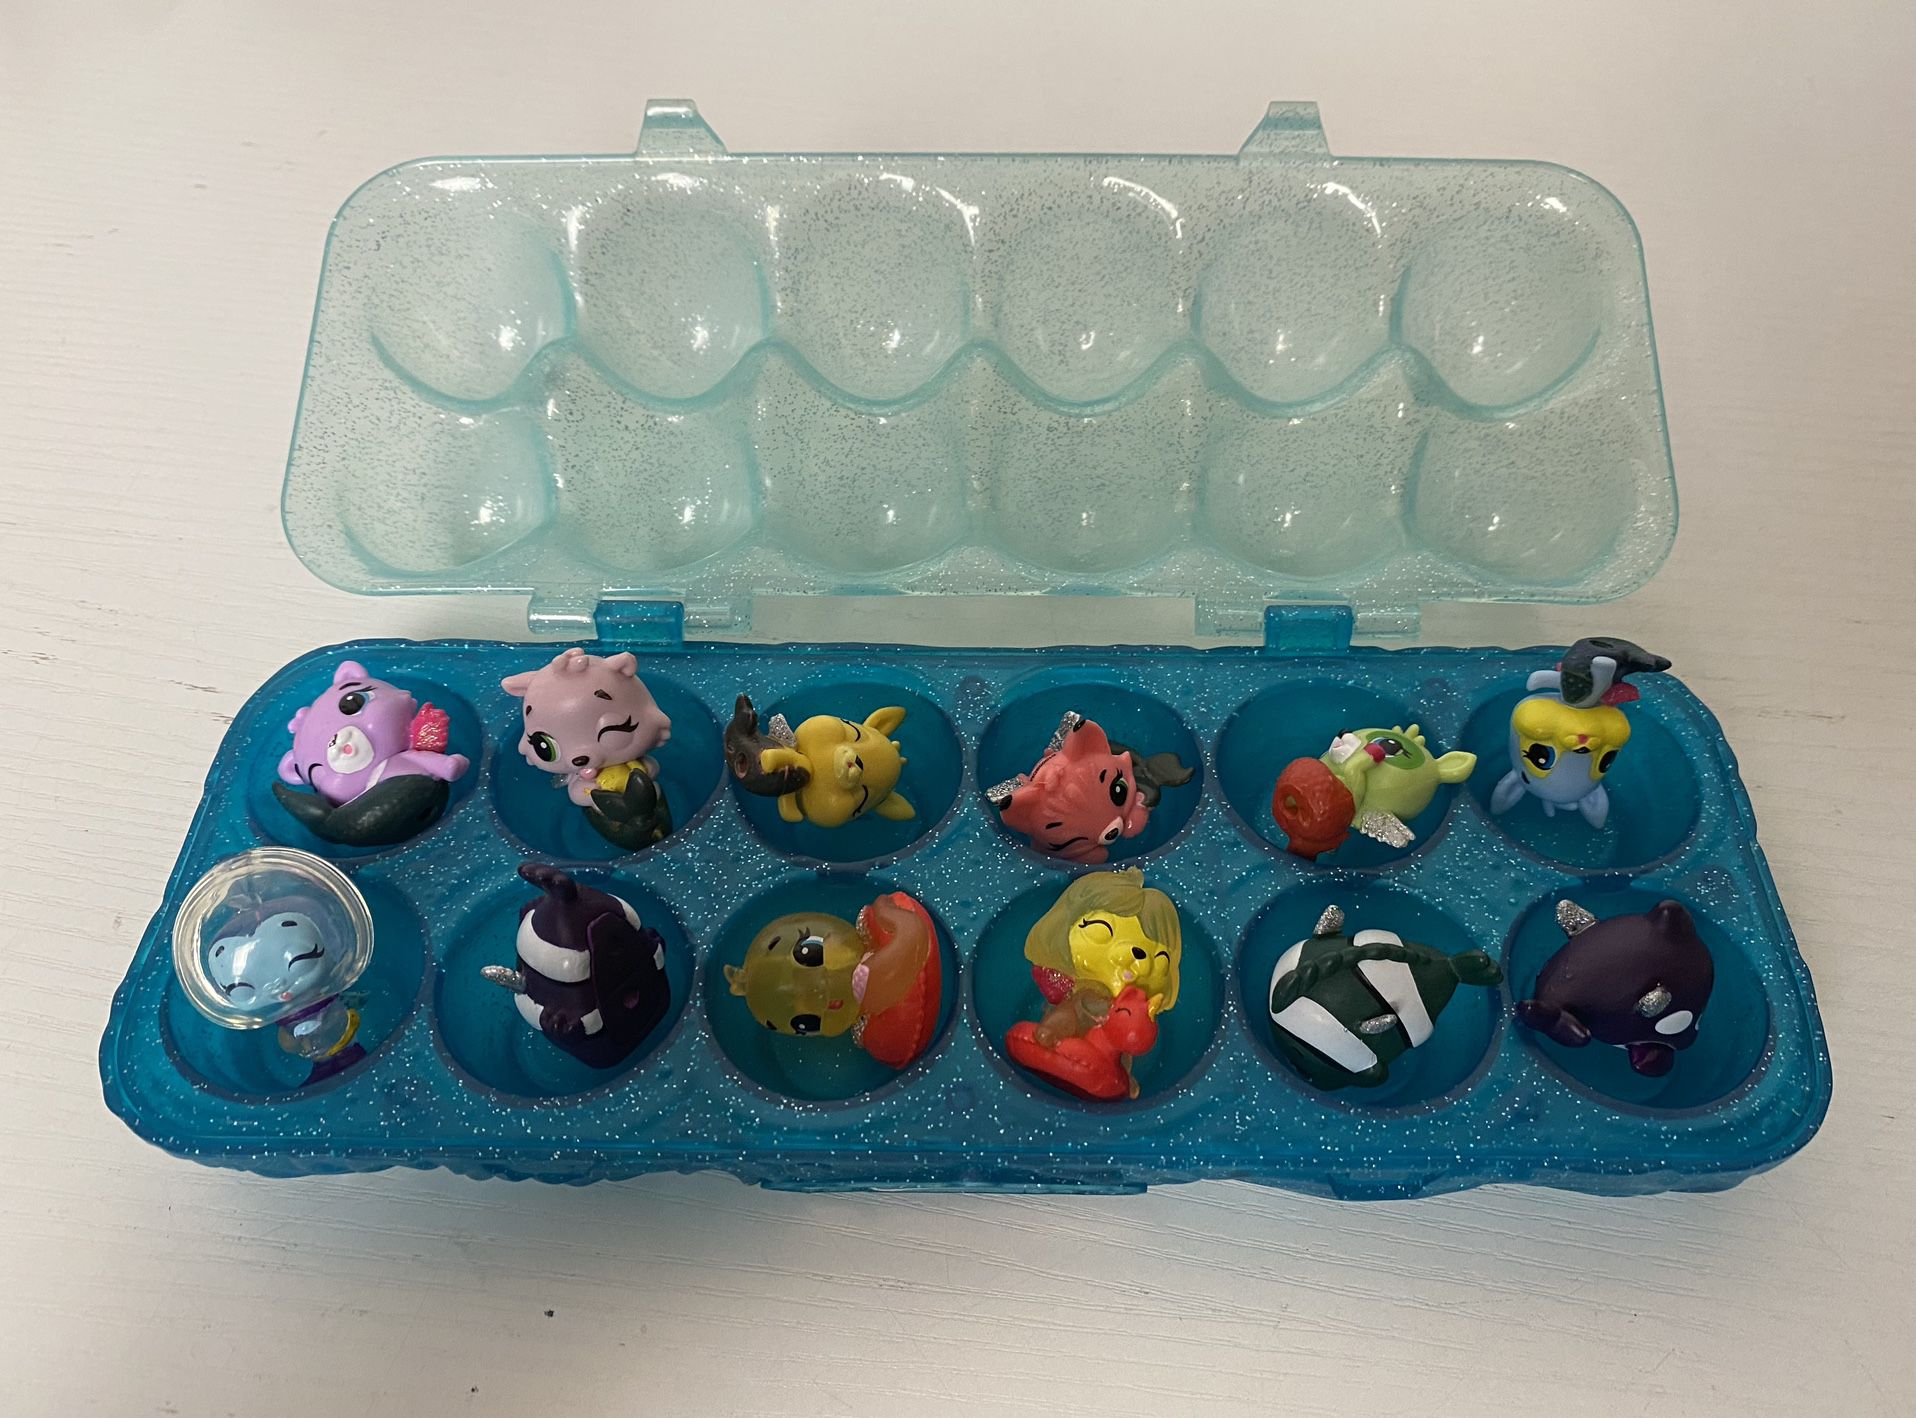 Lot Of 12 Hatchimals Colleggtibles Mini Figures With Blue Storage Egg Carton (With Rare Figure!)